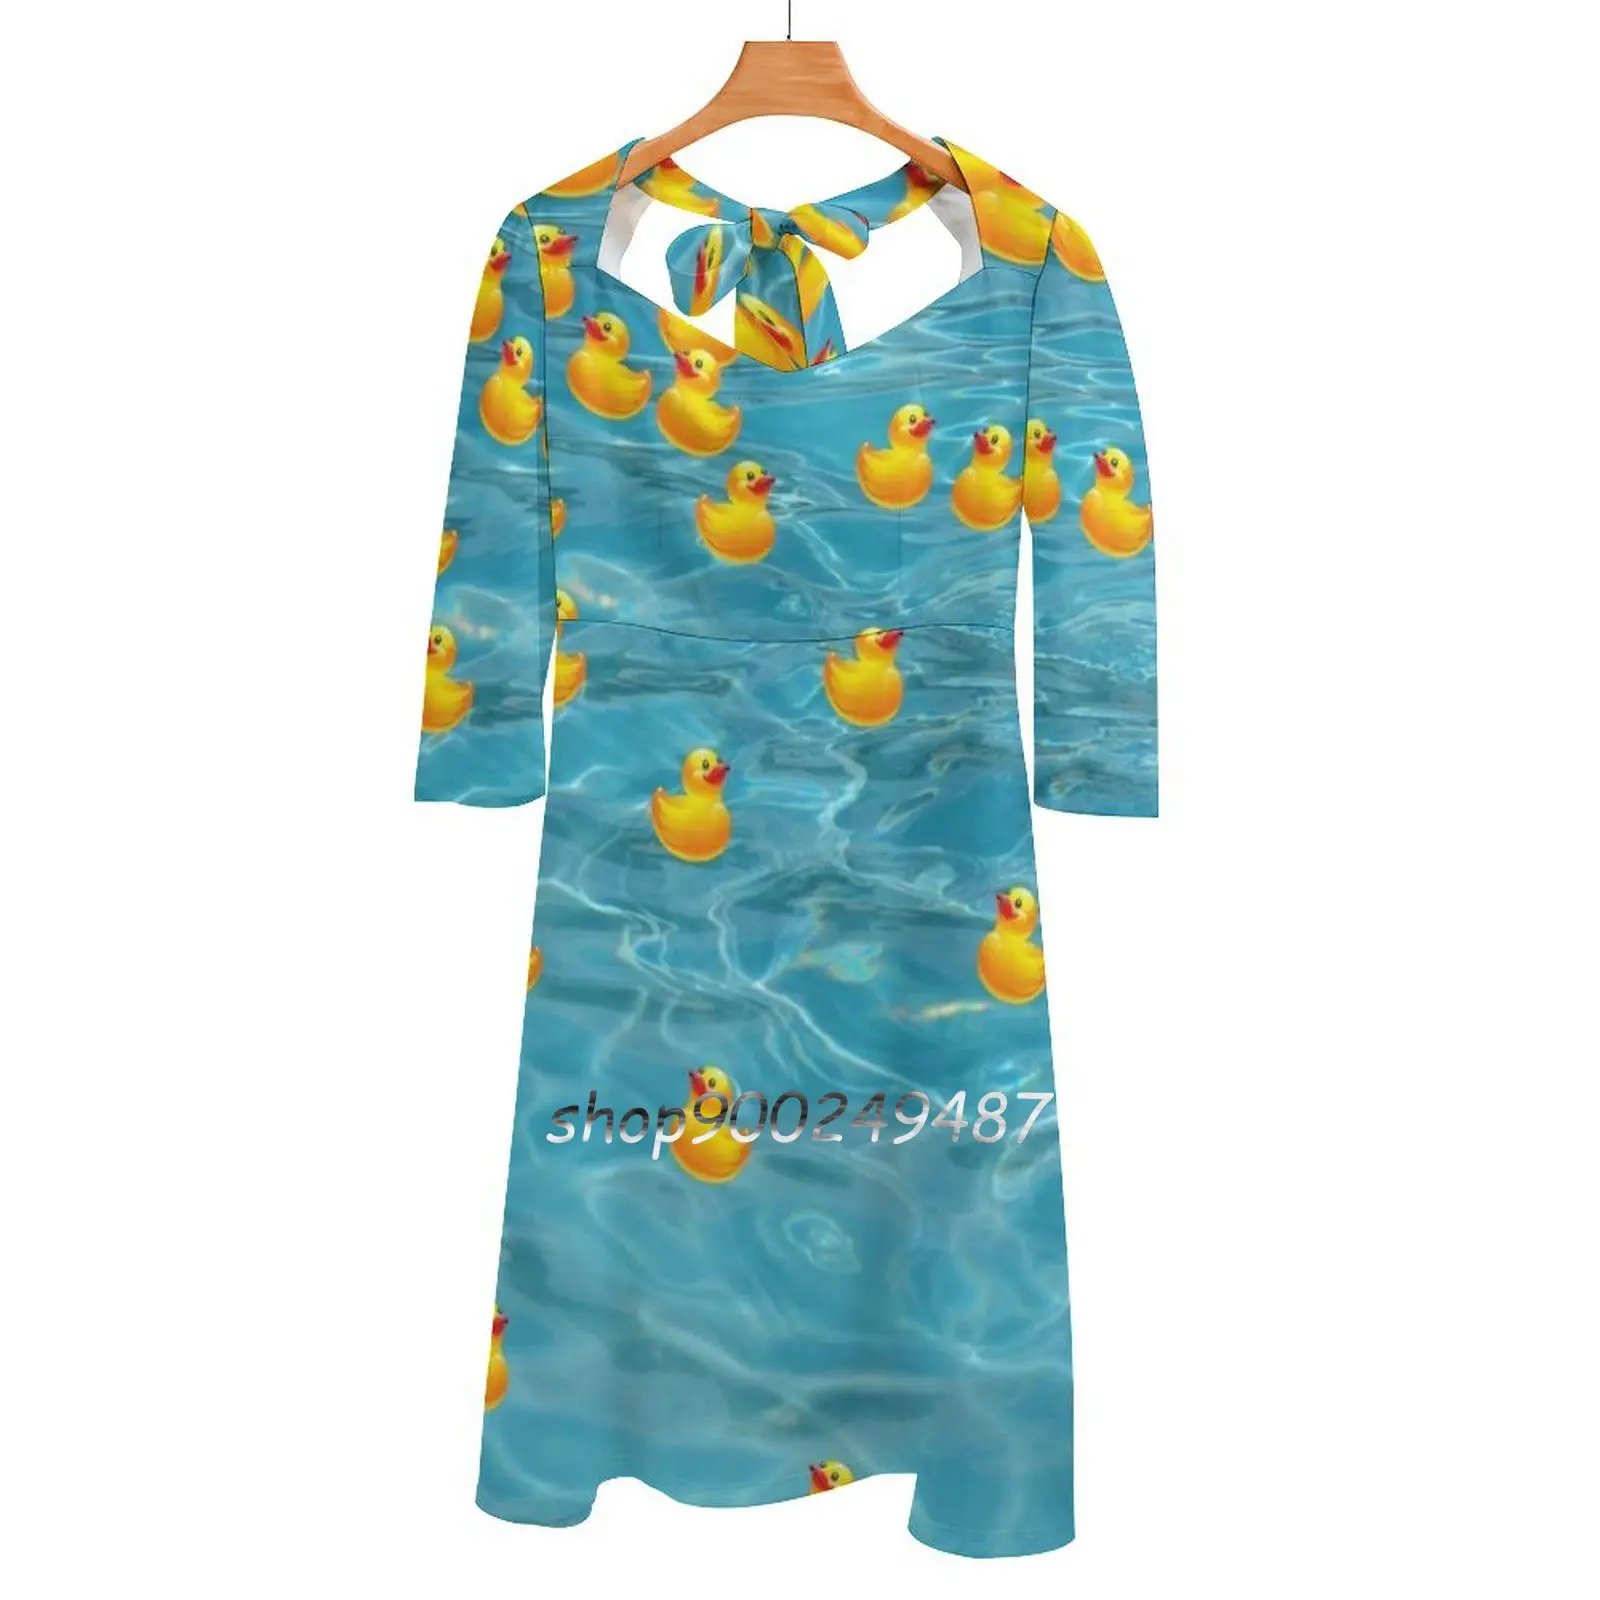 

Rubber Ducky Heaven Ver.2 Square Neck Dress Cute Loose Print Dresses Elegant Beach Party Dress Duck Love Lover Ducky Duckies